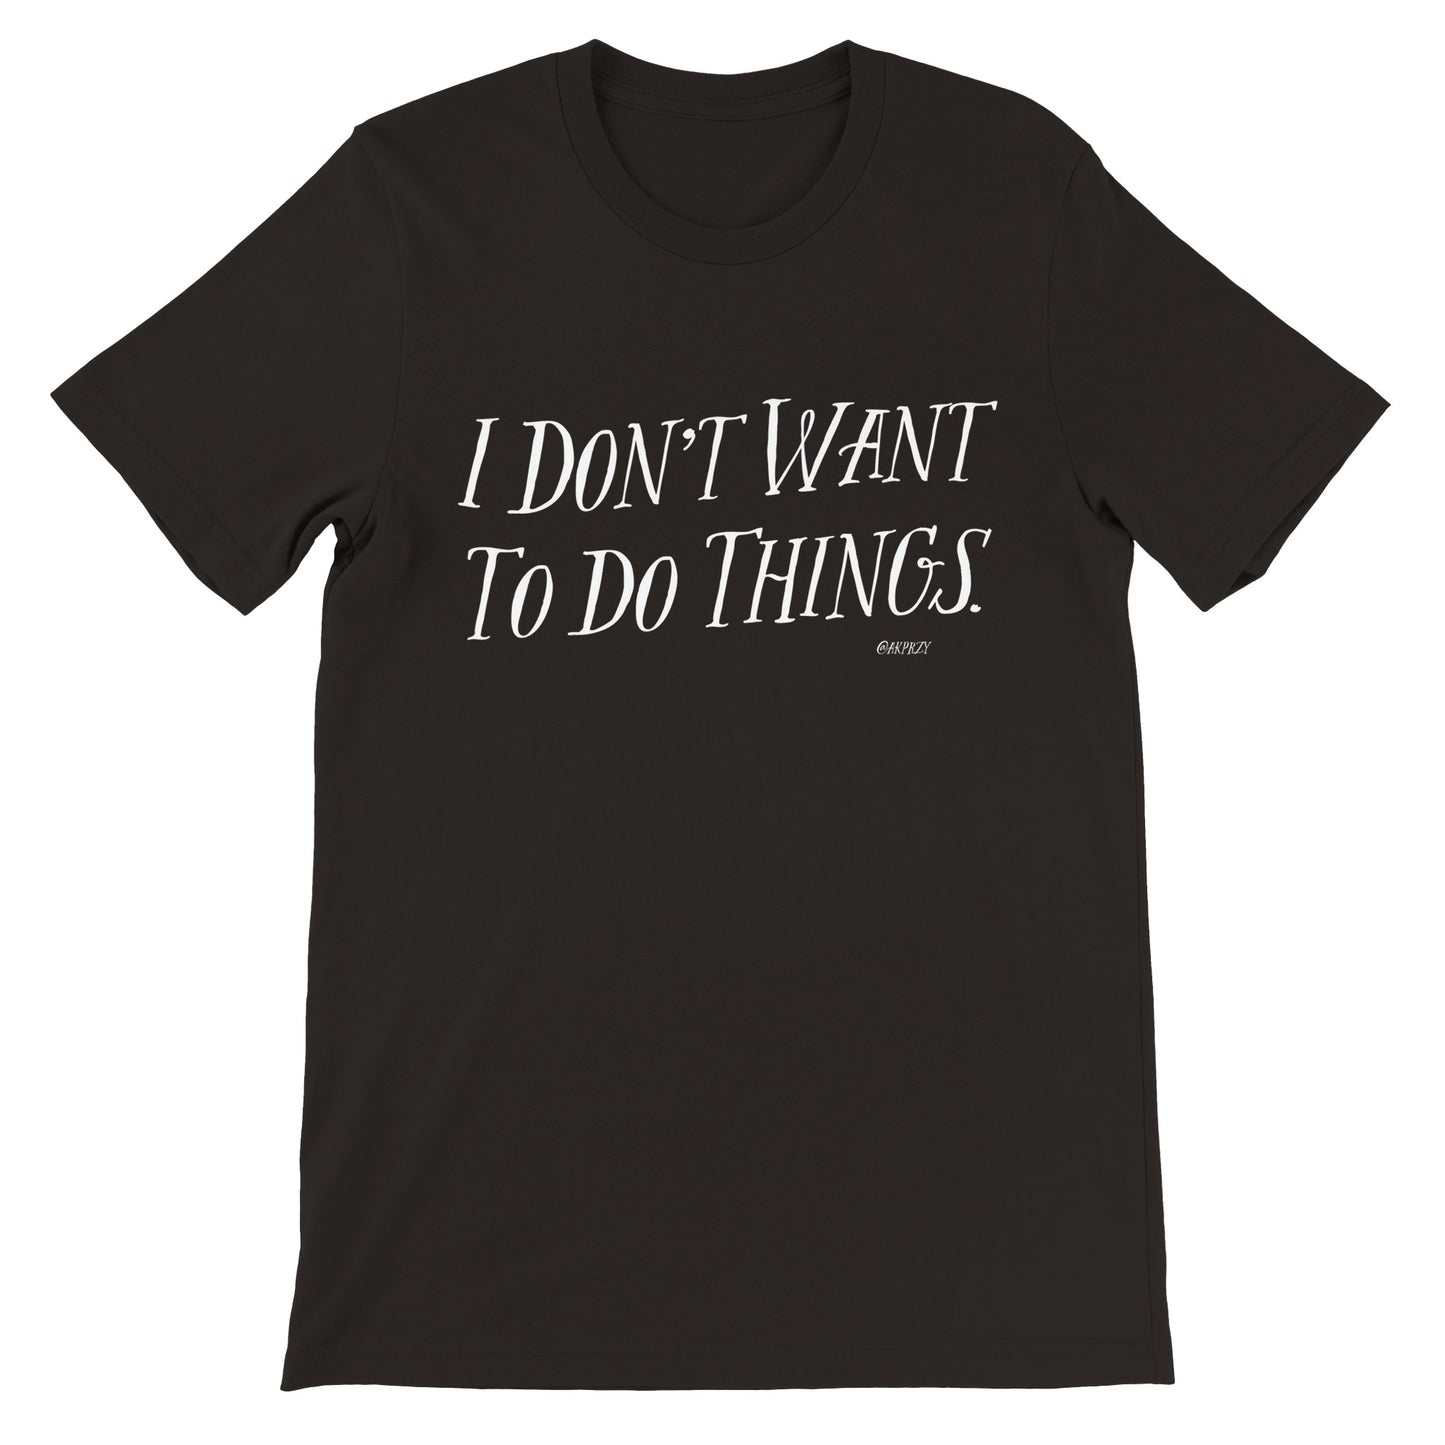 Premium Unisex Crewneck T-shirt - I don't want to do things, color.